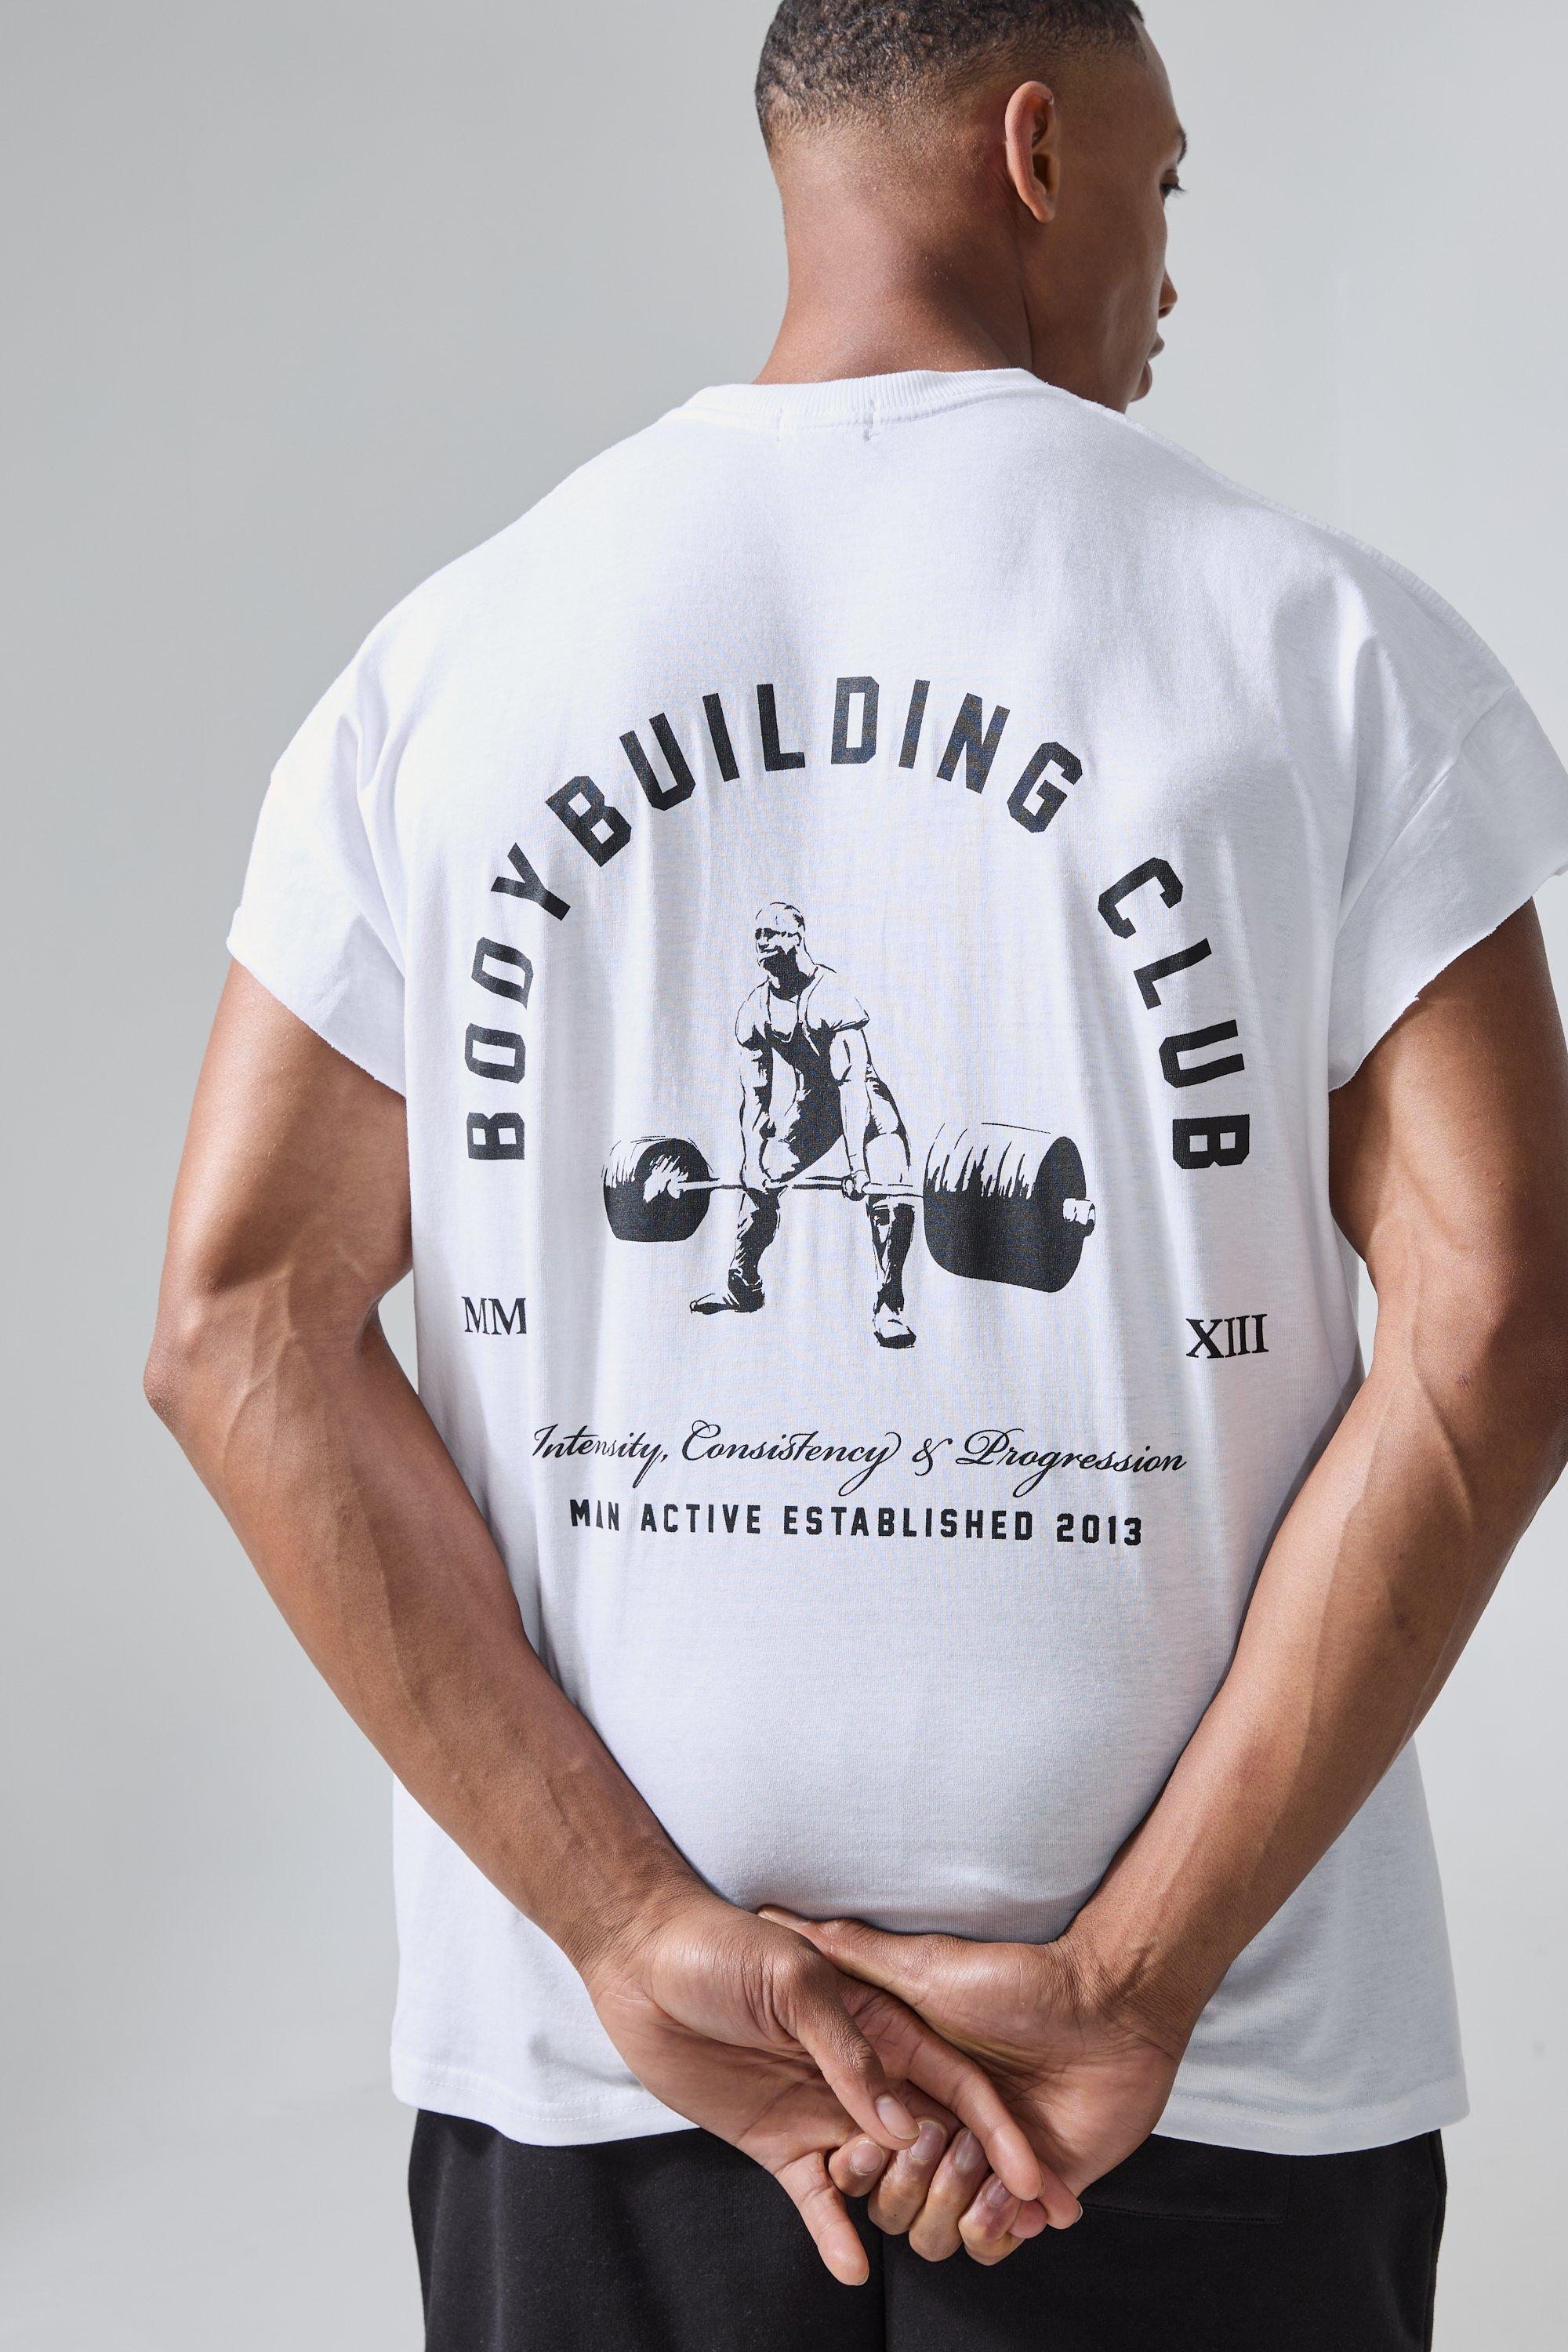 man active oversized body building cut off t-shirt homme - blanc - s, blanc